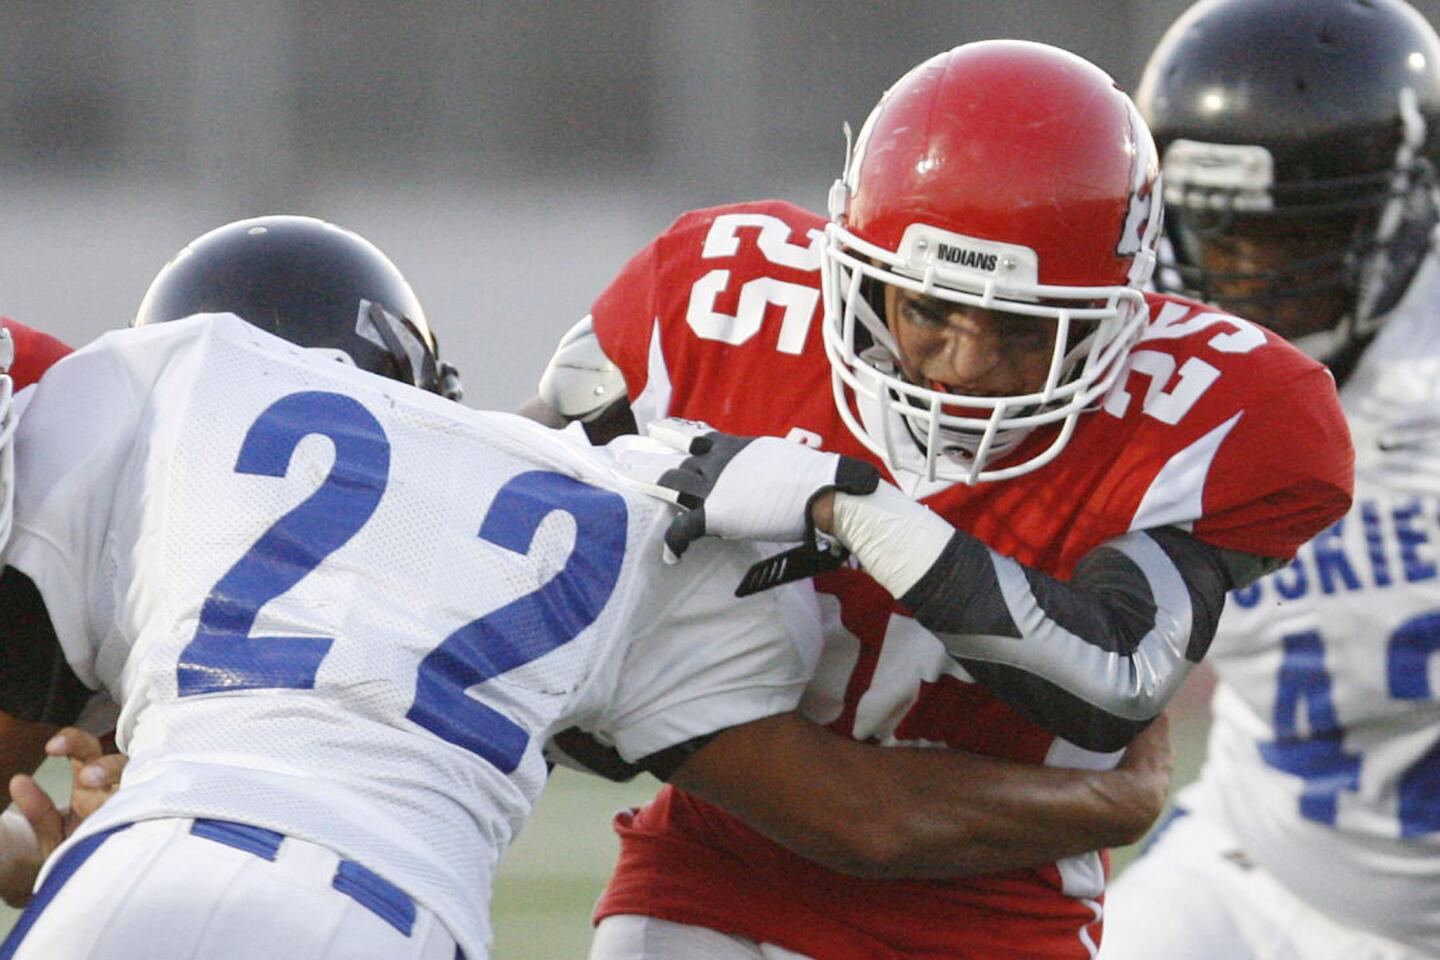 North Hollywood's Christian Campos, left, tackles Israel Montes during a game at John Burroughs High School in Burbank on Friday, September 7, 2012.